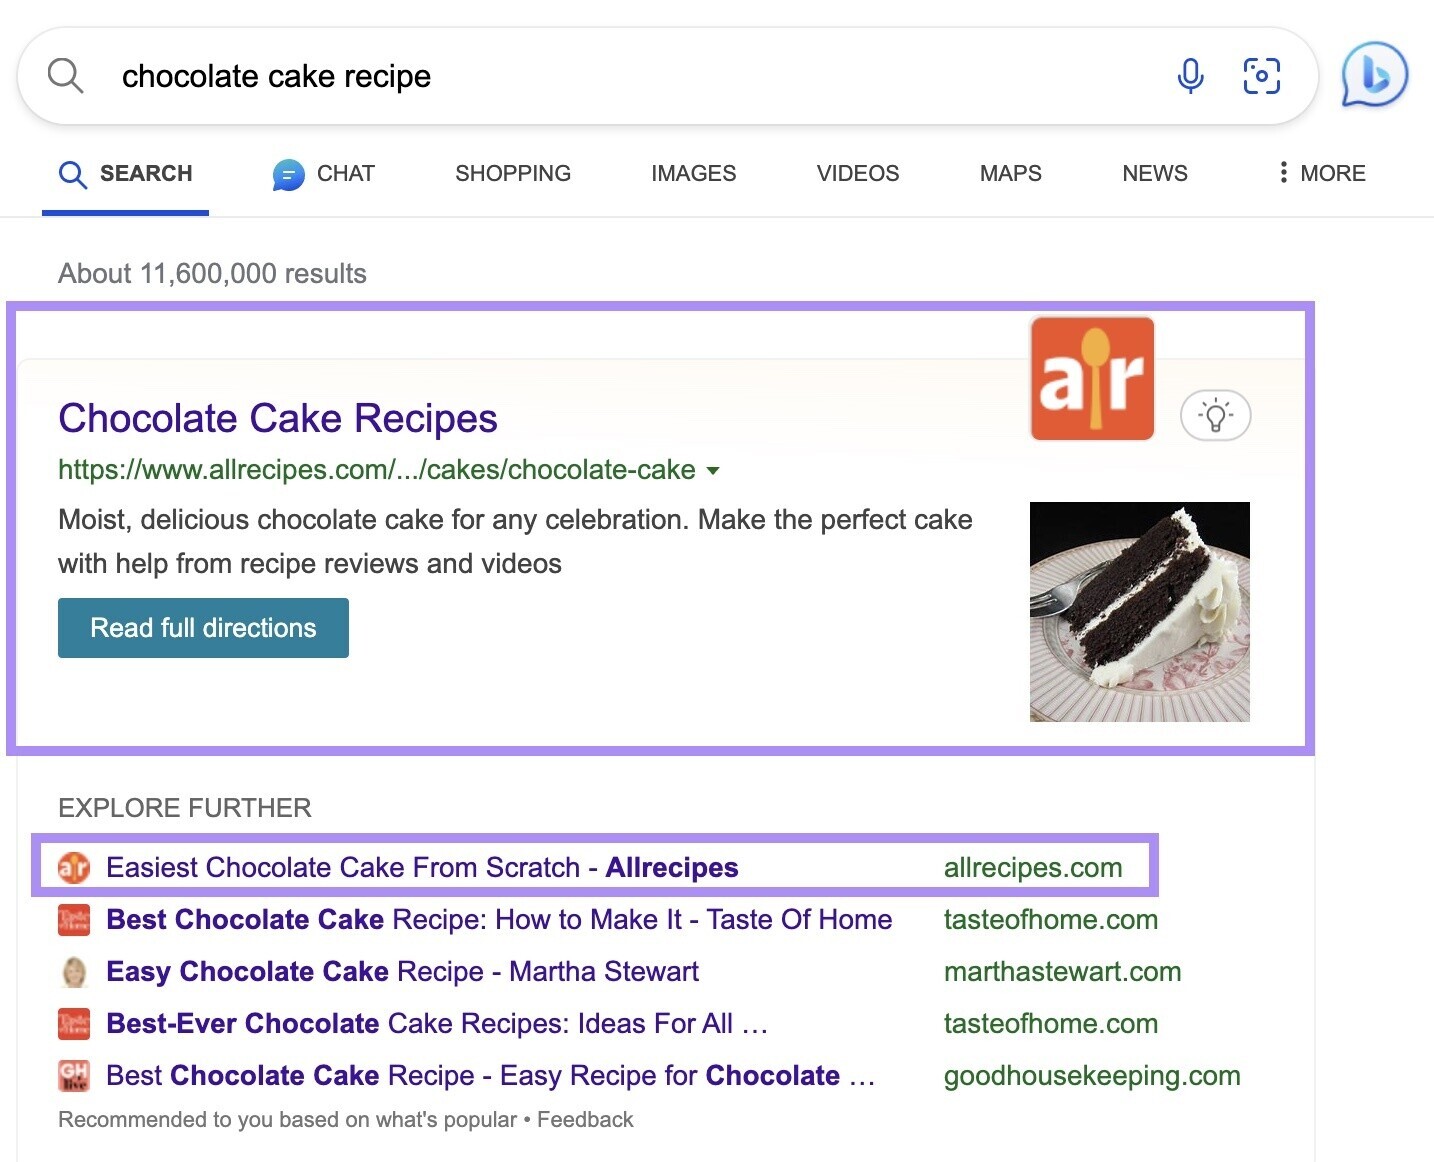 Bing’s first results for “chocolate cake recipe” is from "All Recipes"